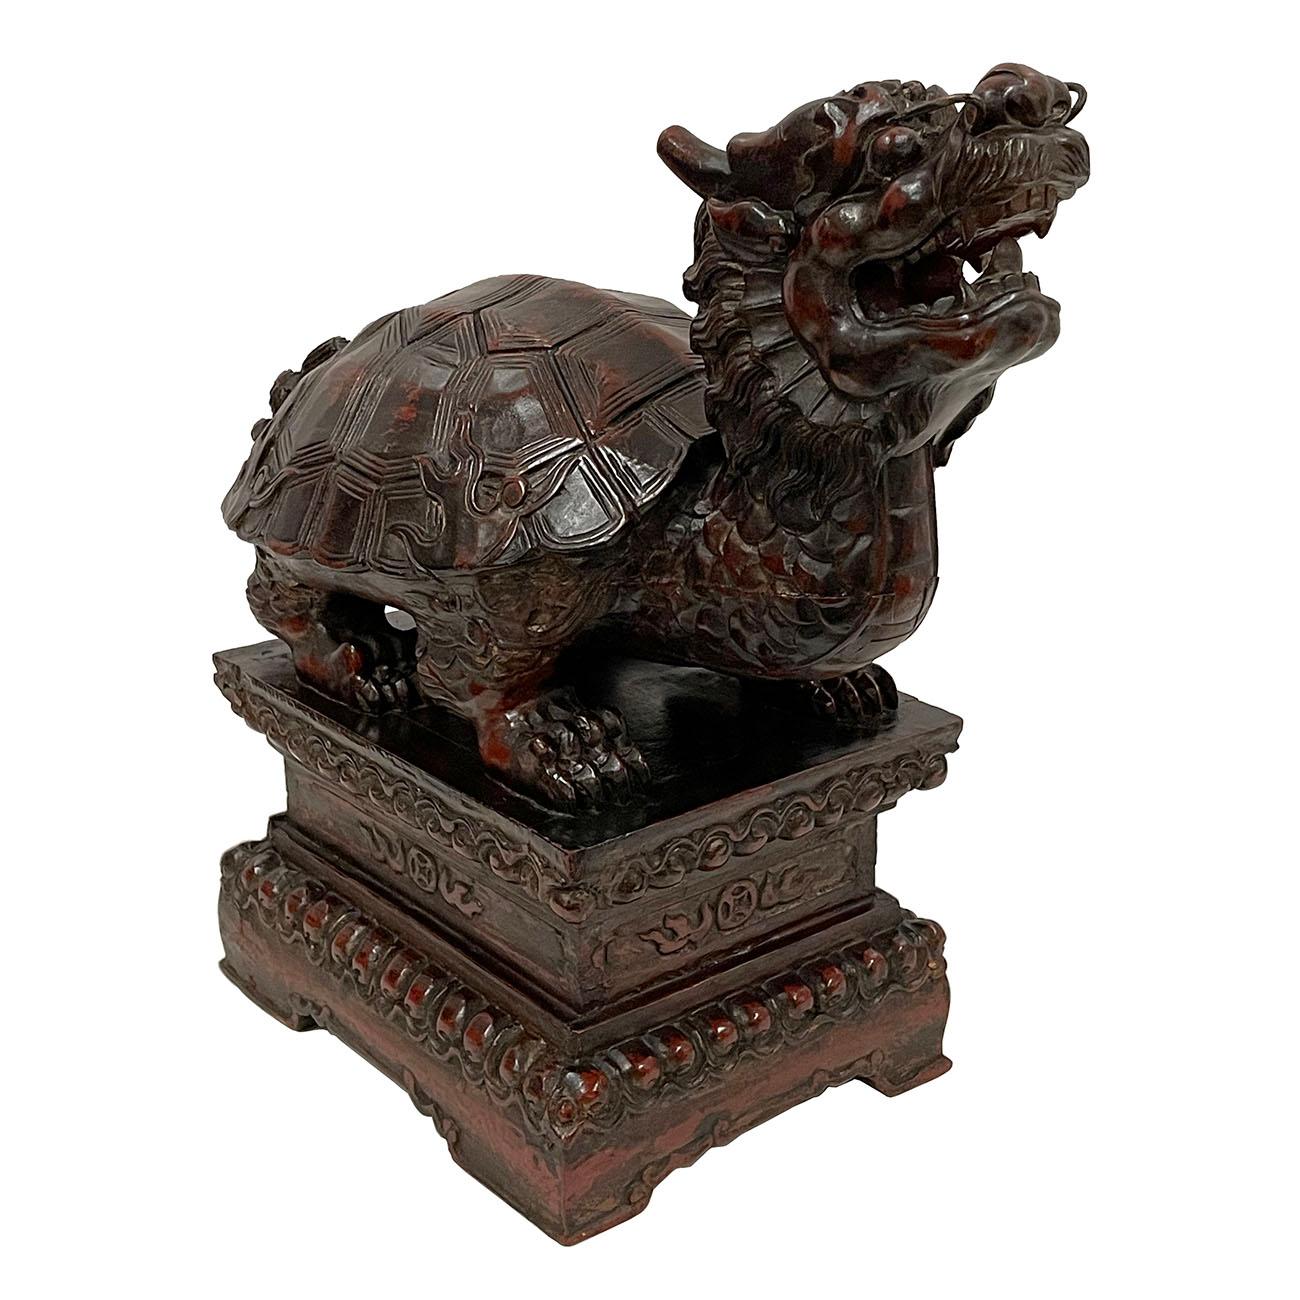 This is a magnificent Chinese Antique Wood Carved Dragon Turtle Sculpture. It shows very detailed hand carving works on it. It is all hand made and hand carved. It was the mascot in the imperial family, meaning the supreme power. You can see from